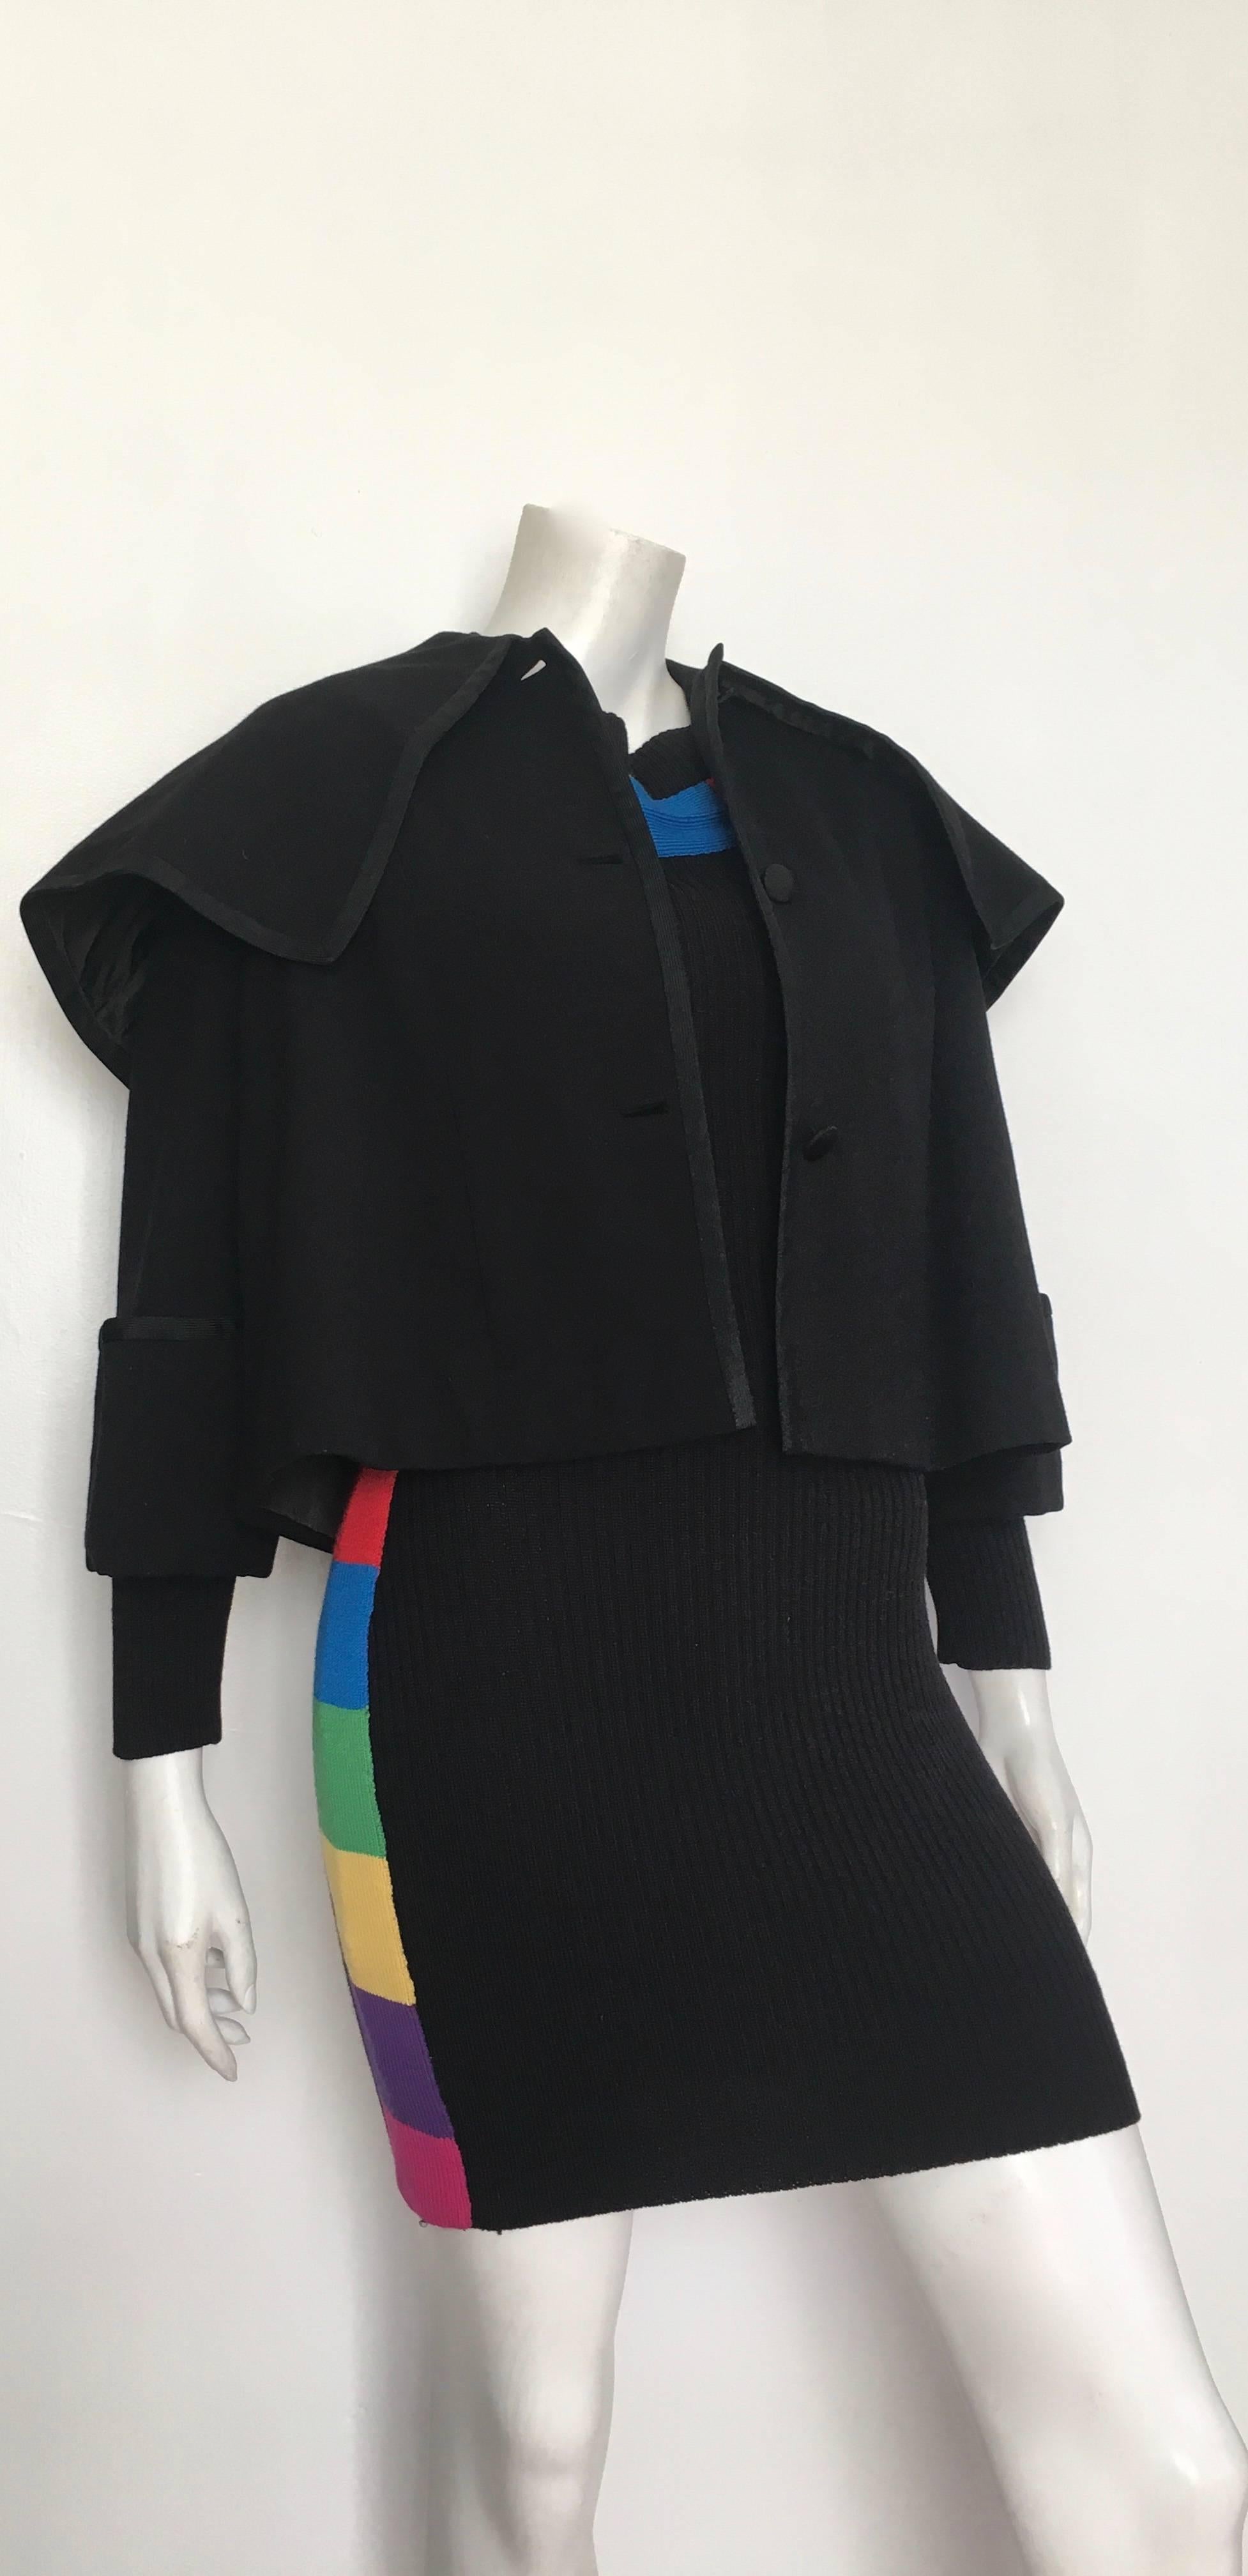 Traina-Norell 1950s black wool cropped 3 button capelet jacket will fit an USA size 6/8.  Jacket was from Leon Frohsin who was the owner of a fine fur shop in Atlanta. Every detail about this Traina Norell capelet is exquisite.  This is a very fine